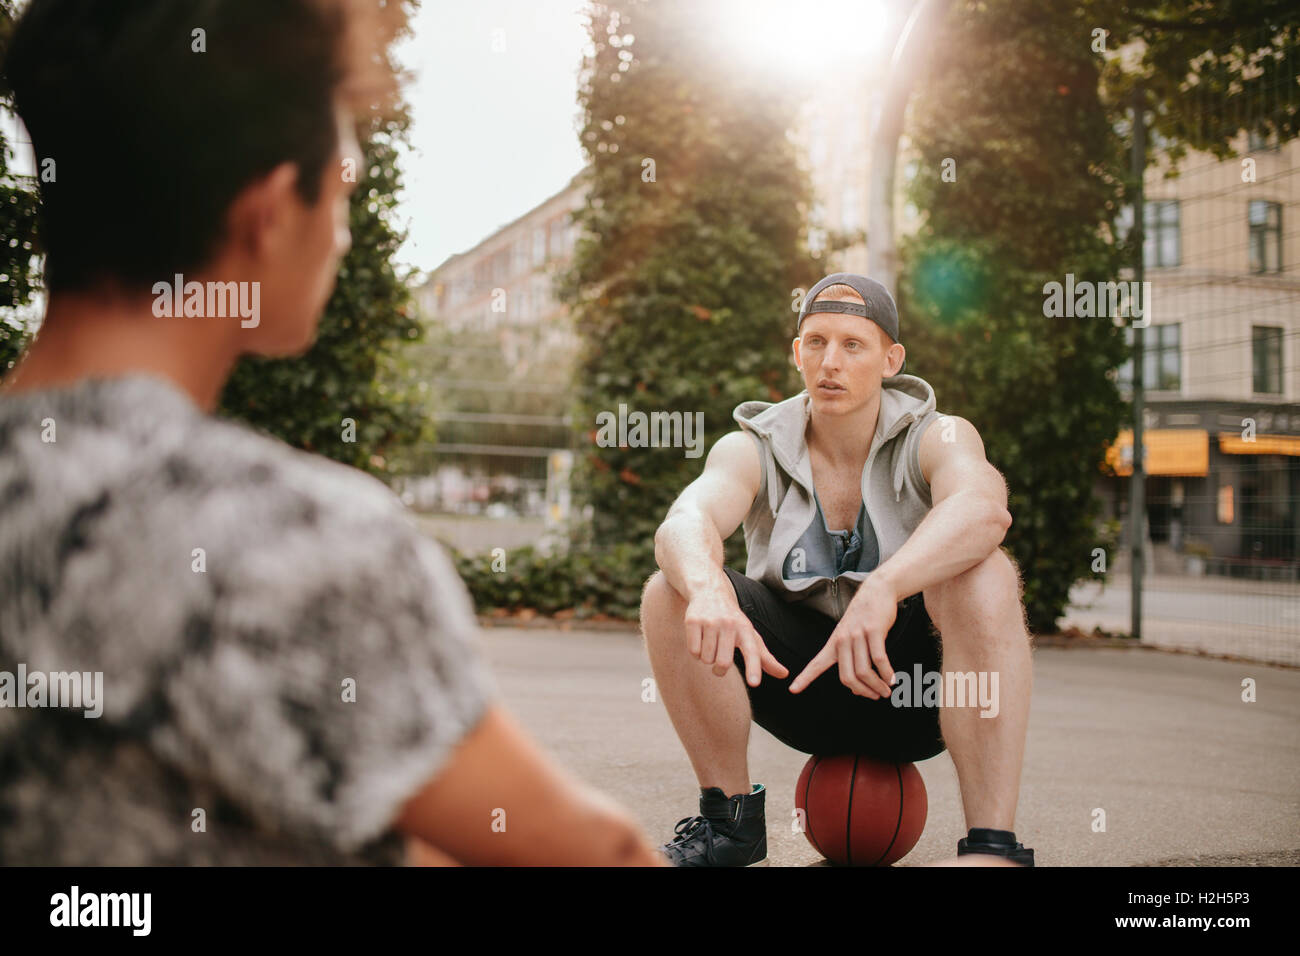 Young man sitting on top of basketball on court and talking with a friend. Streetball players taking break after playing a game. Stock Photo